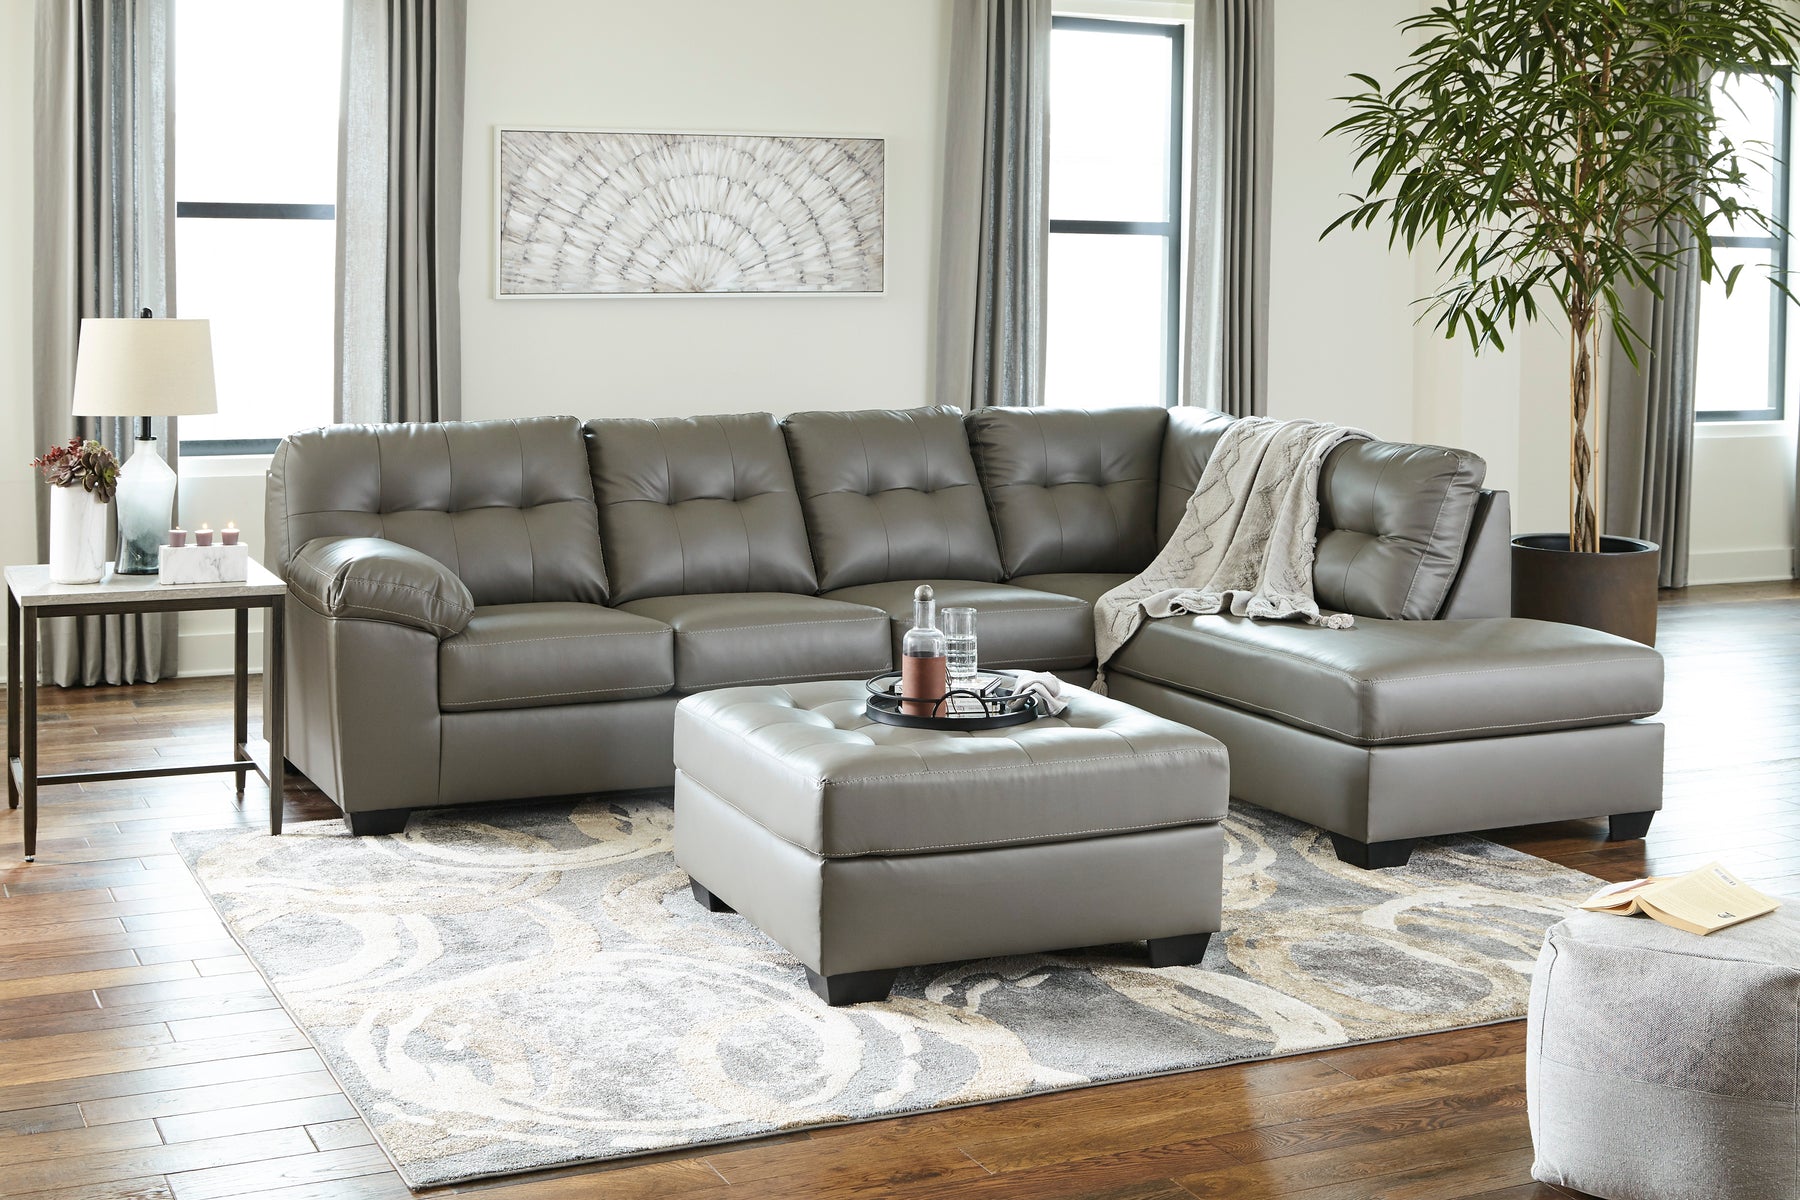 Donlen 2 Pc Sectional Living Room Donlen 2 Pc Sectional Living Room | White modern Sectional Las Vegas Furniture store Half Price Furniture